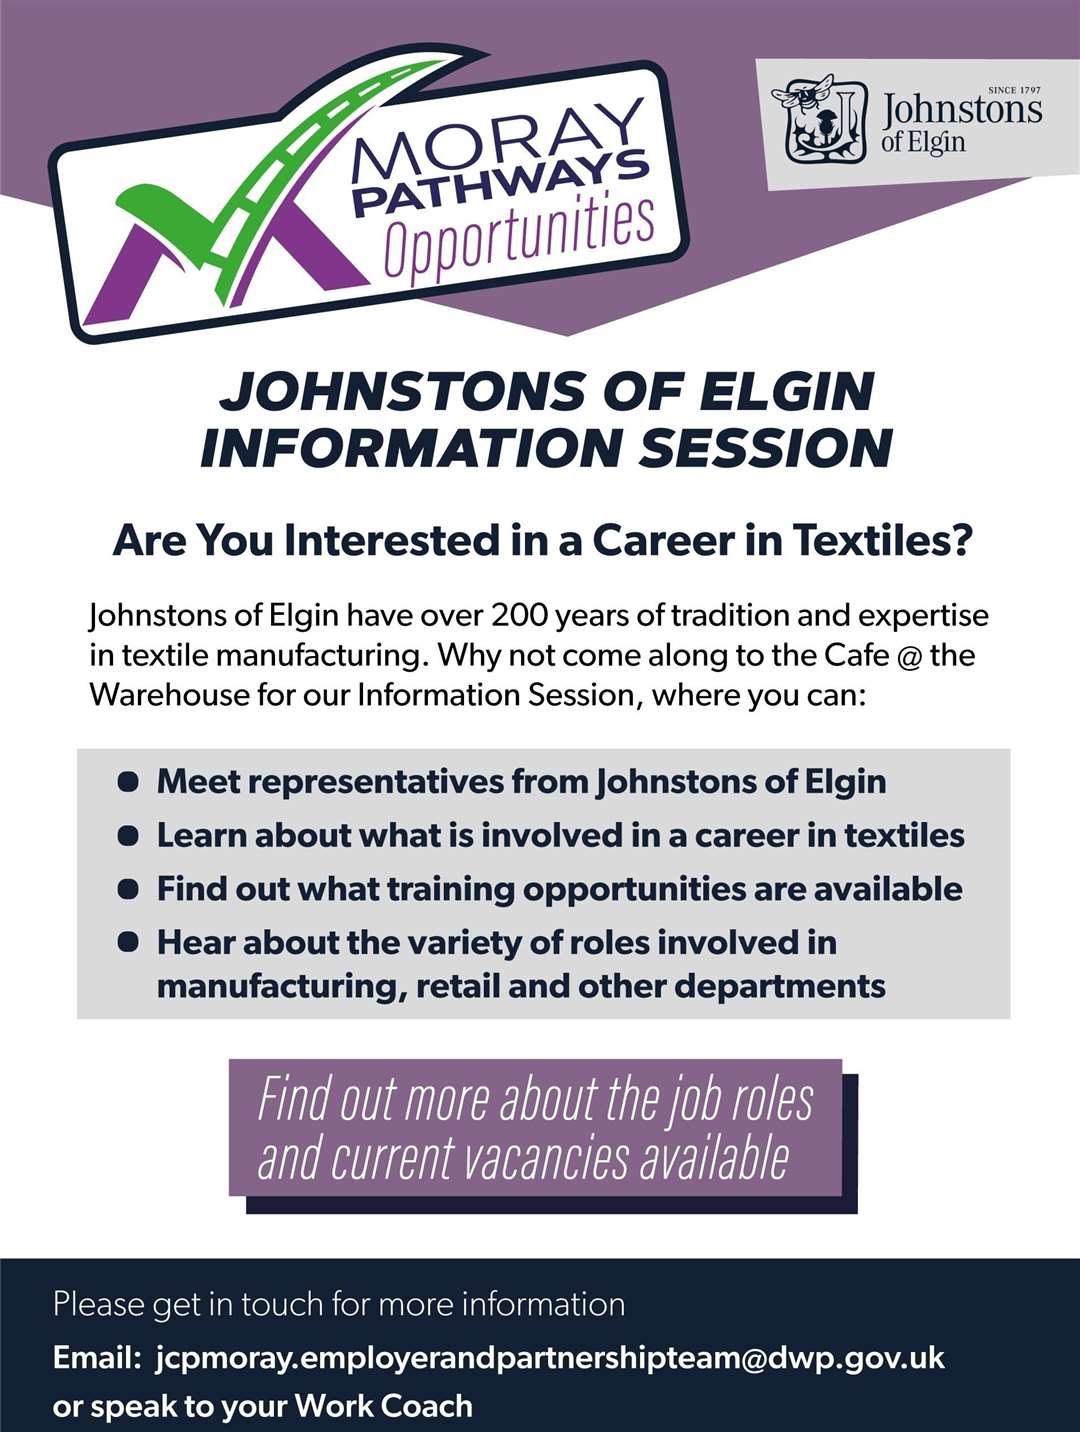 The DWP and Moray Pathways are due to host a Johnston's Of Elgin career information session soon.